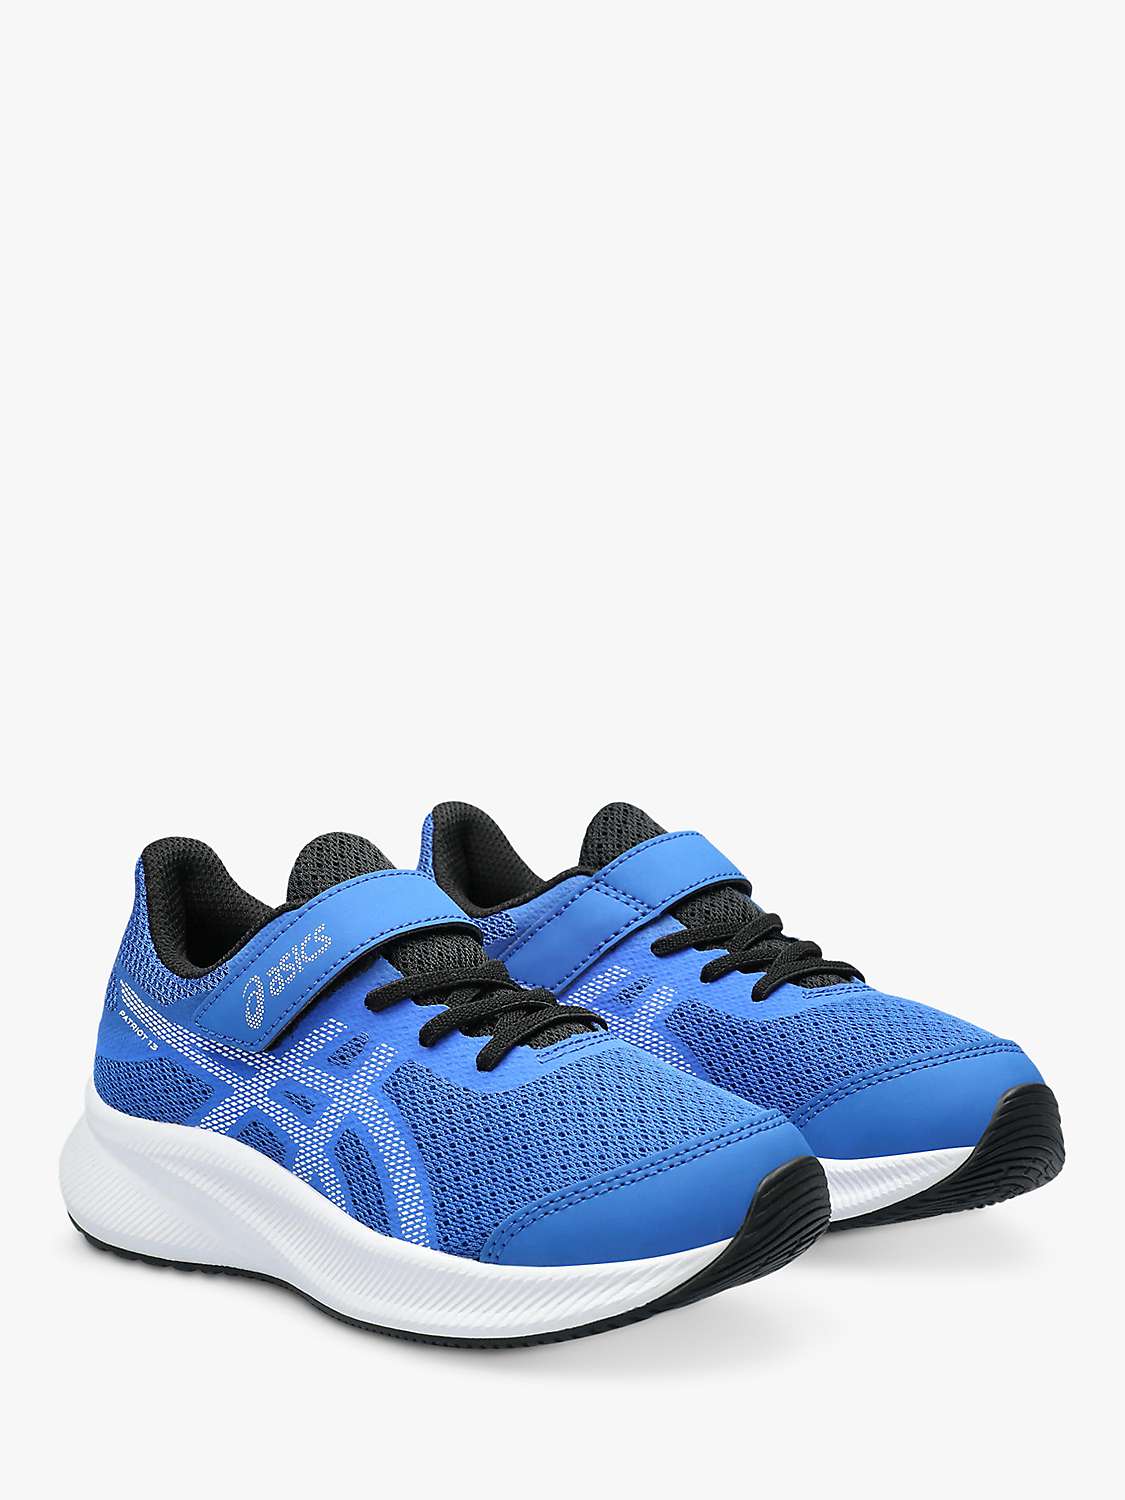 Buy ASICS Kids' PATRIOT PS 13 Trainers, Bright Blue Online at johnlewis.com